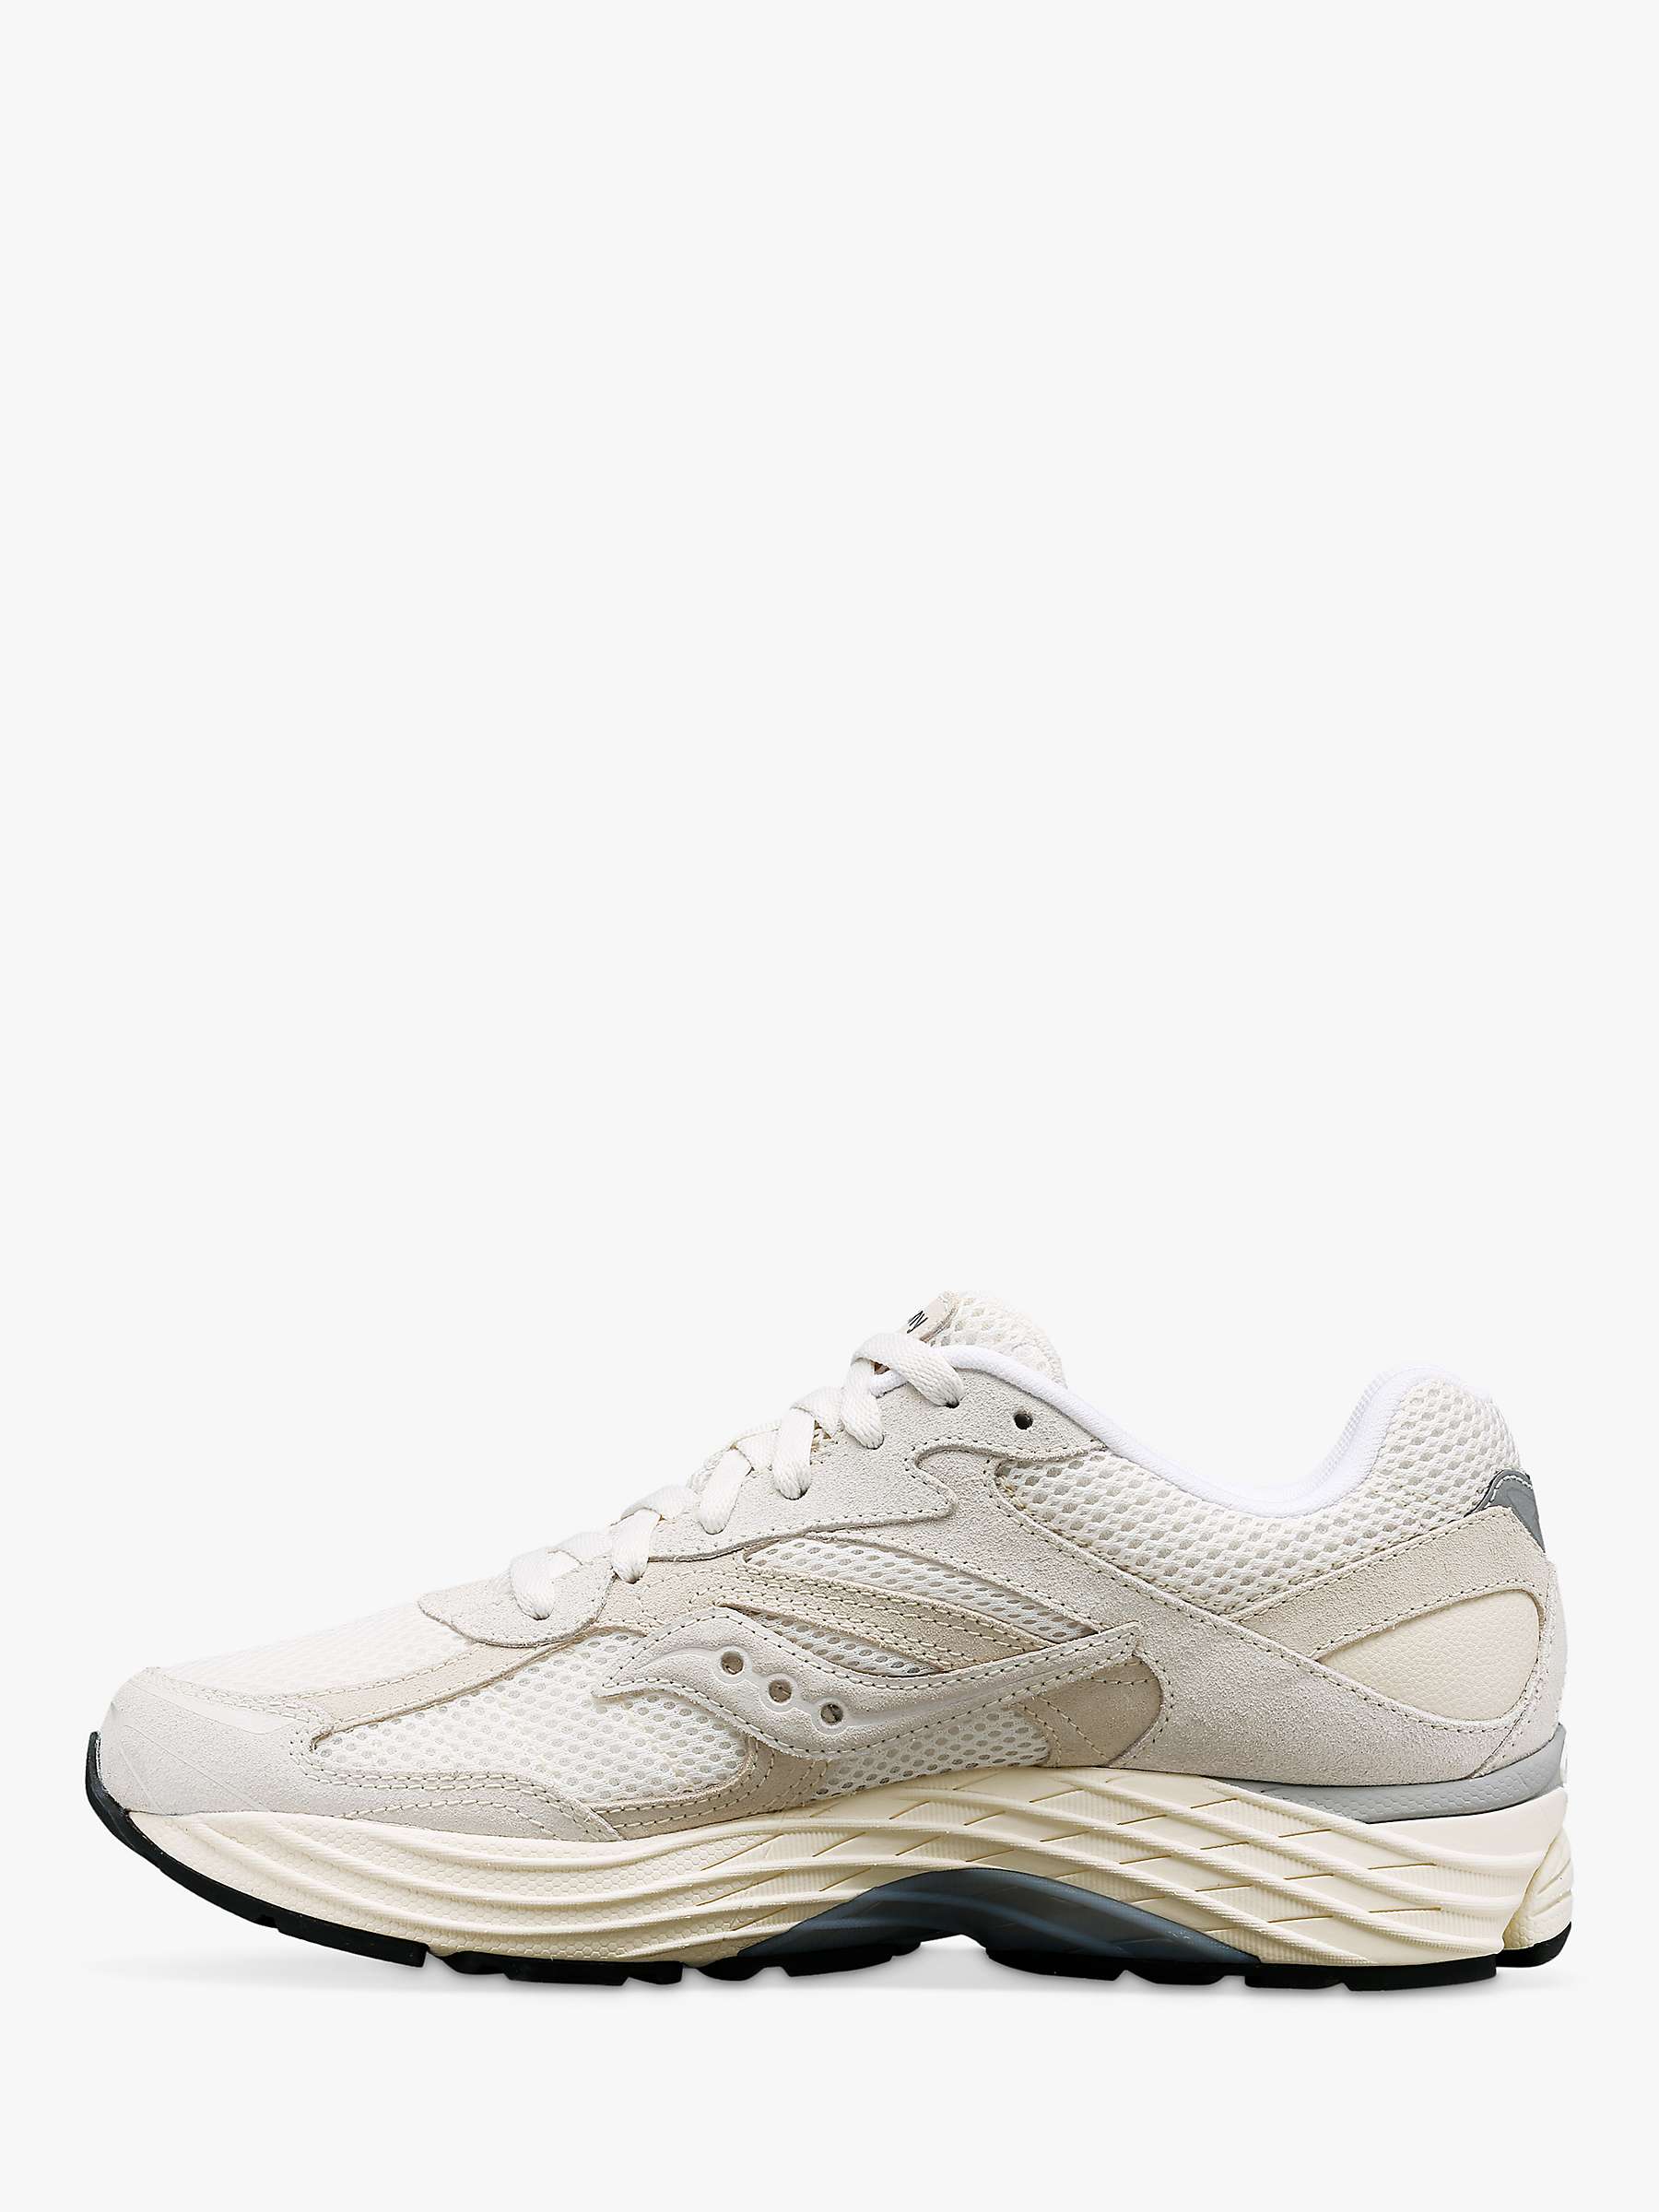 Buy Saucony Pro Grid Omni 9 Trainers, White Online at johnlewis.com